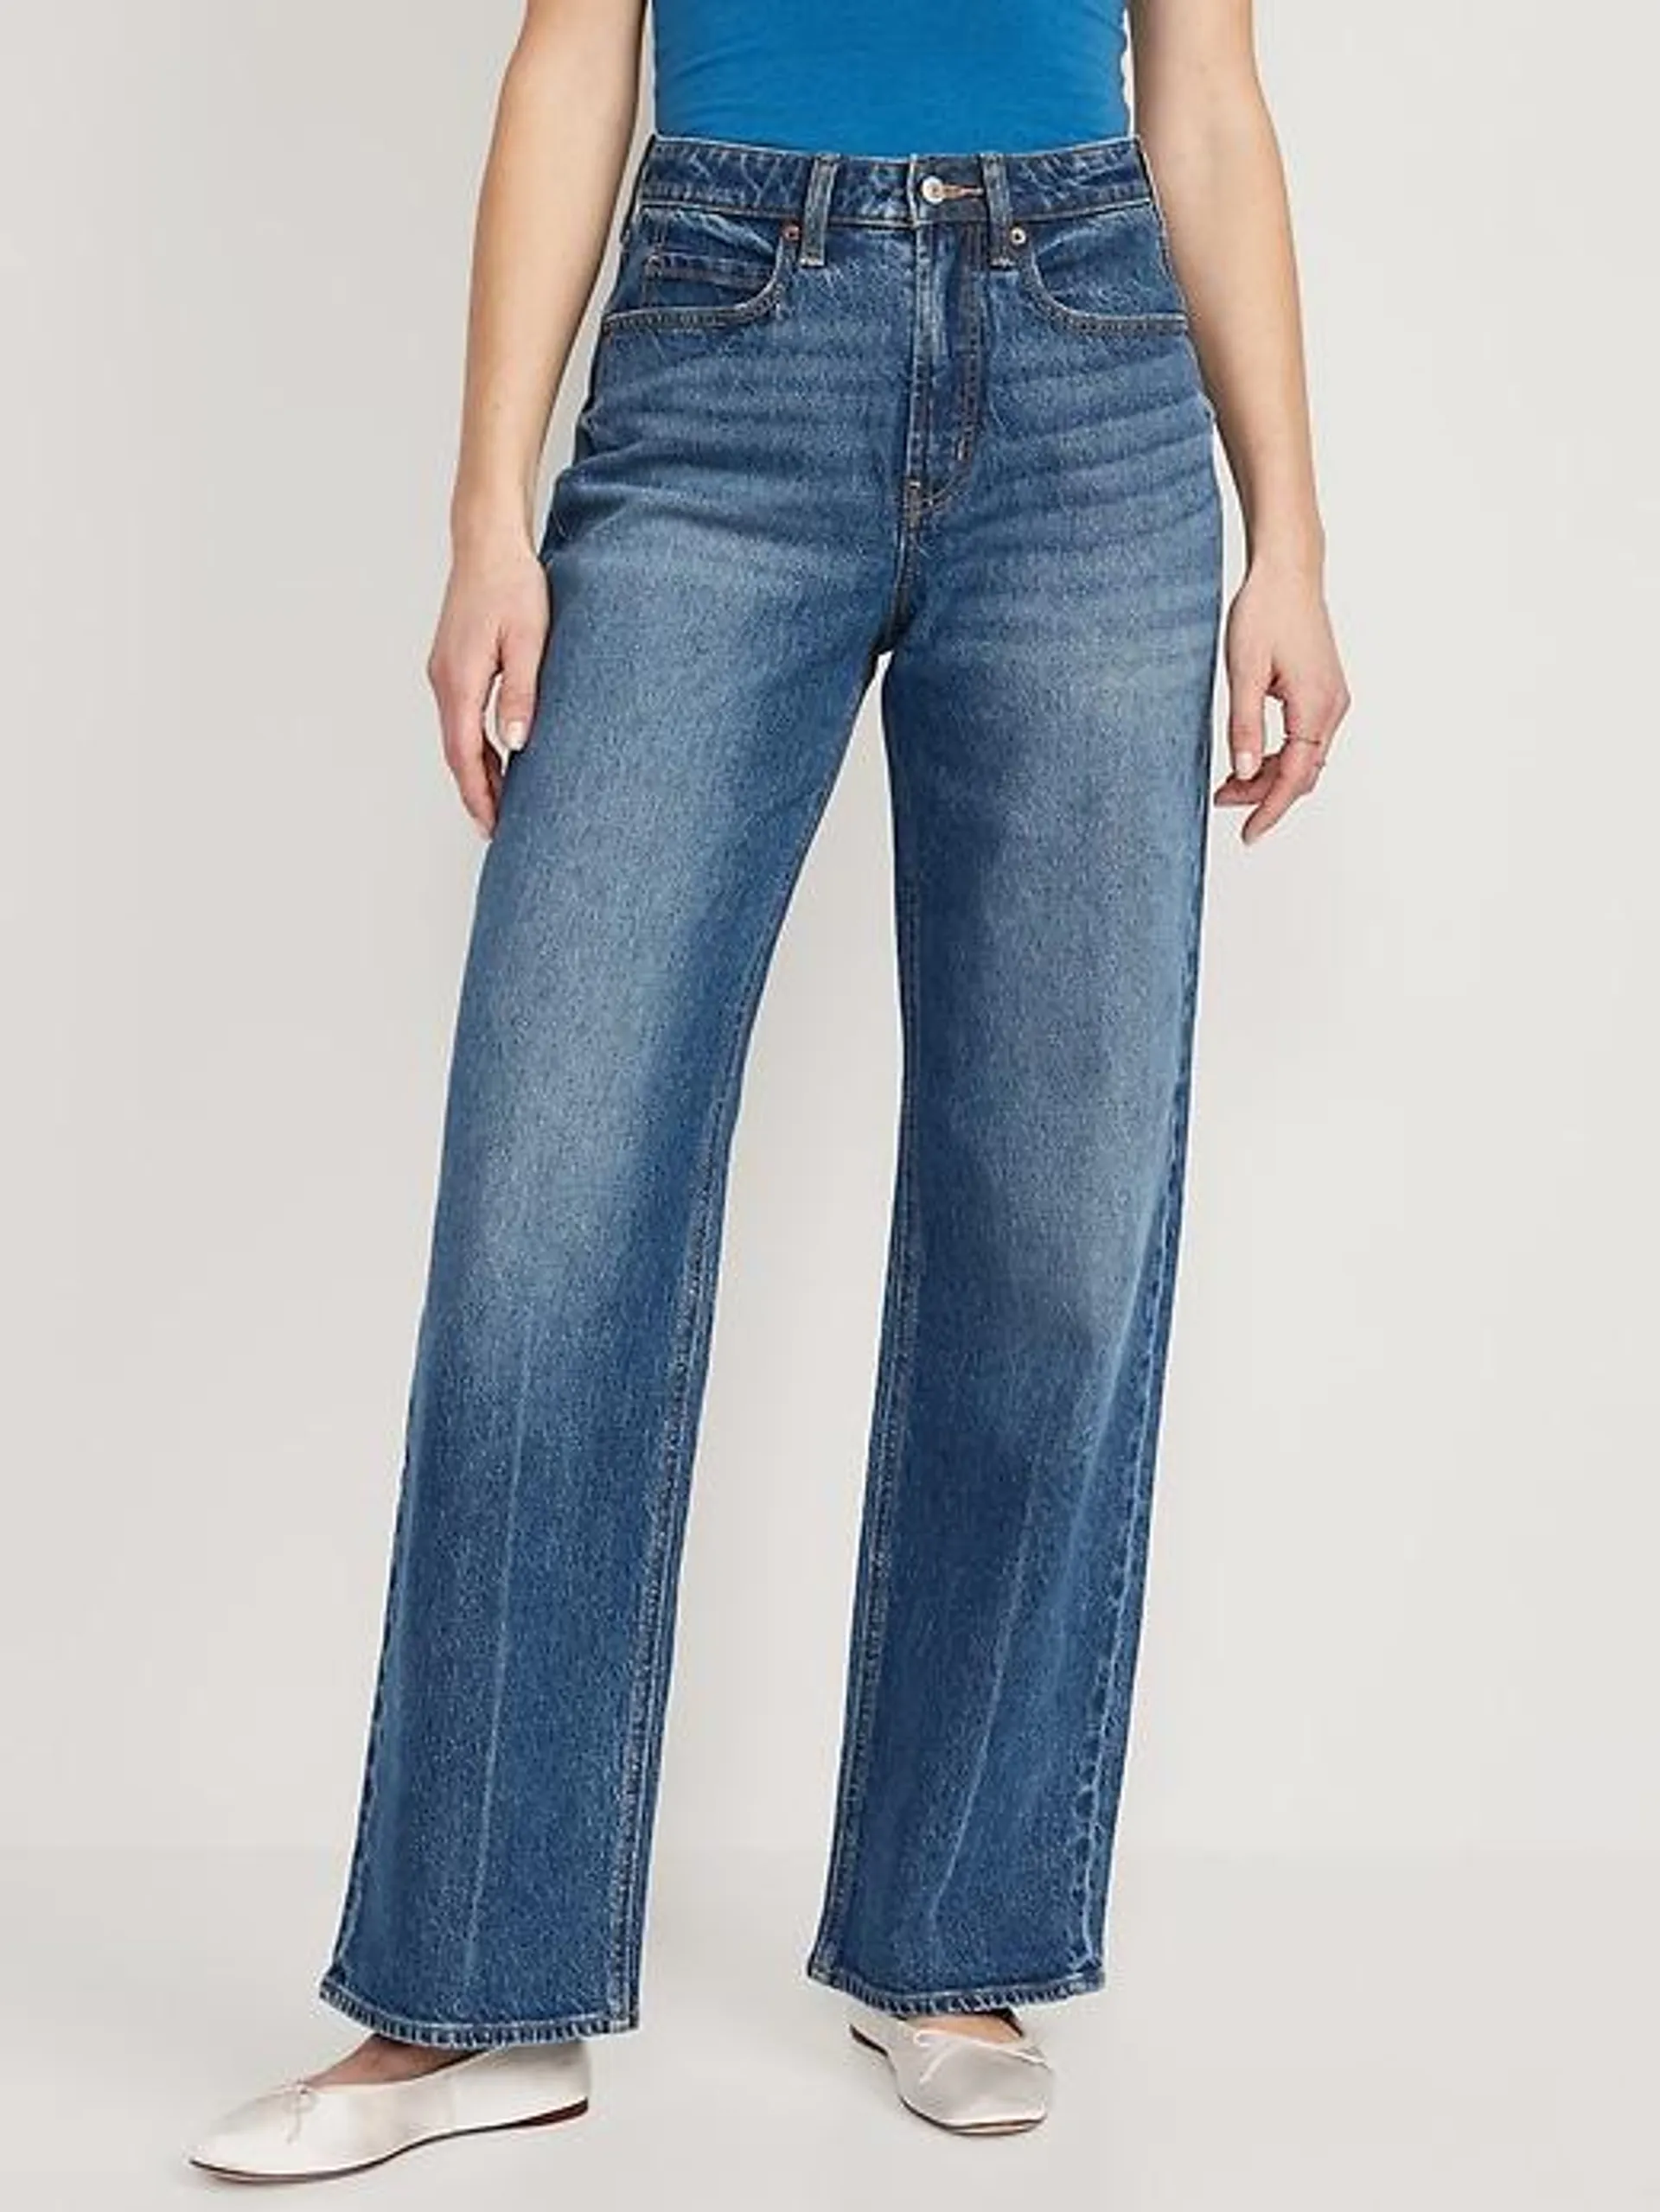 Curvy Extra High-Waisted Sky-Hi Wide-Leg Jeans for Women